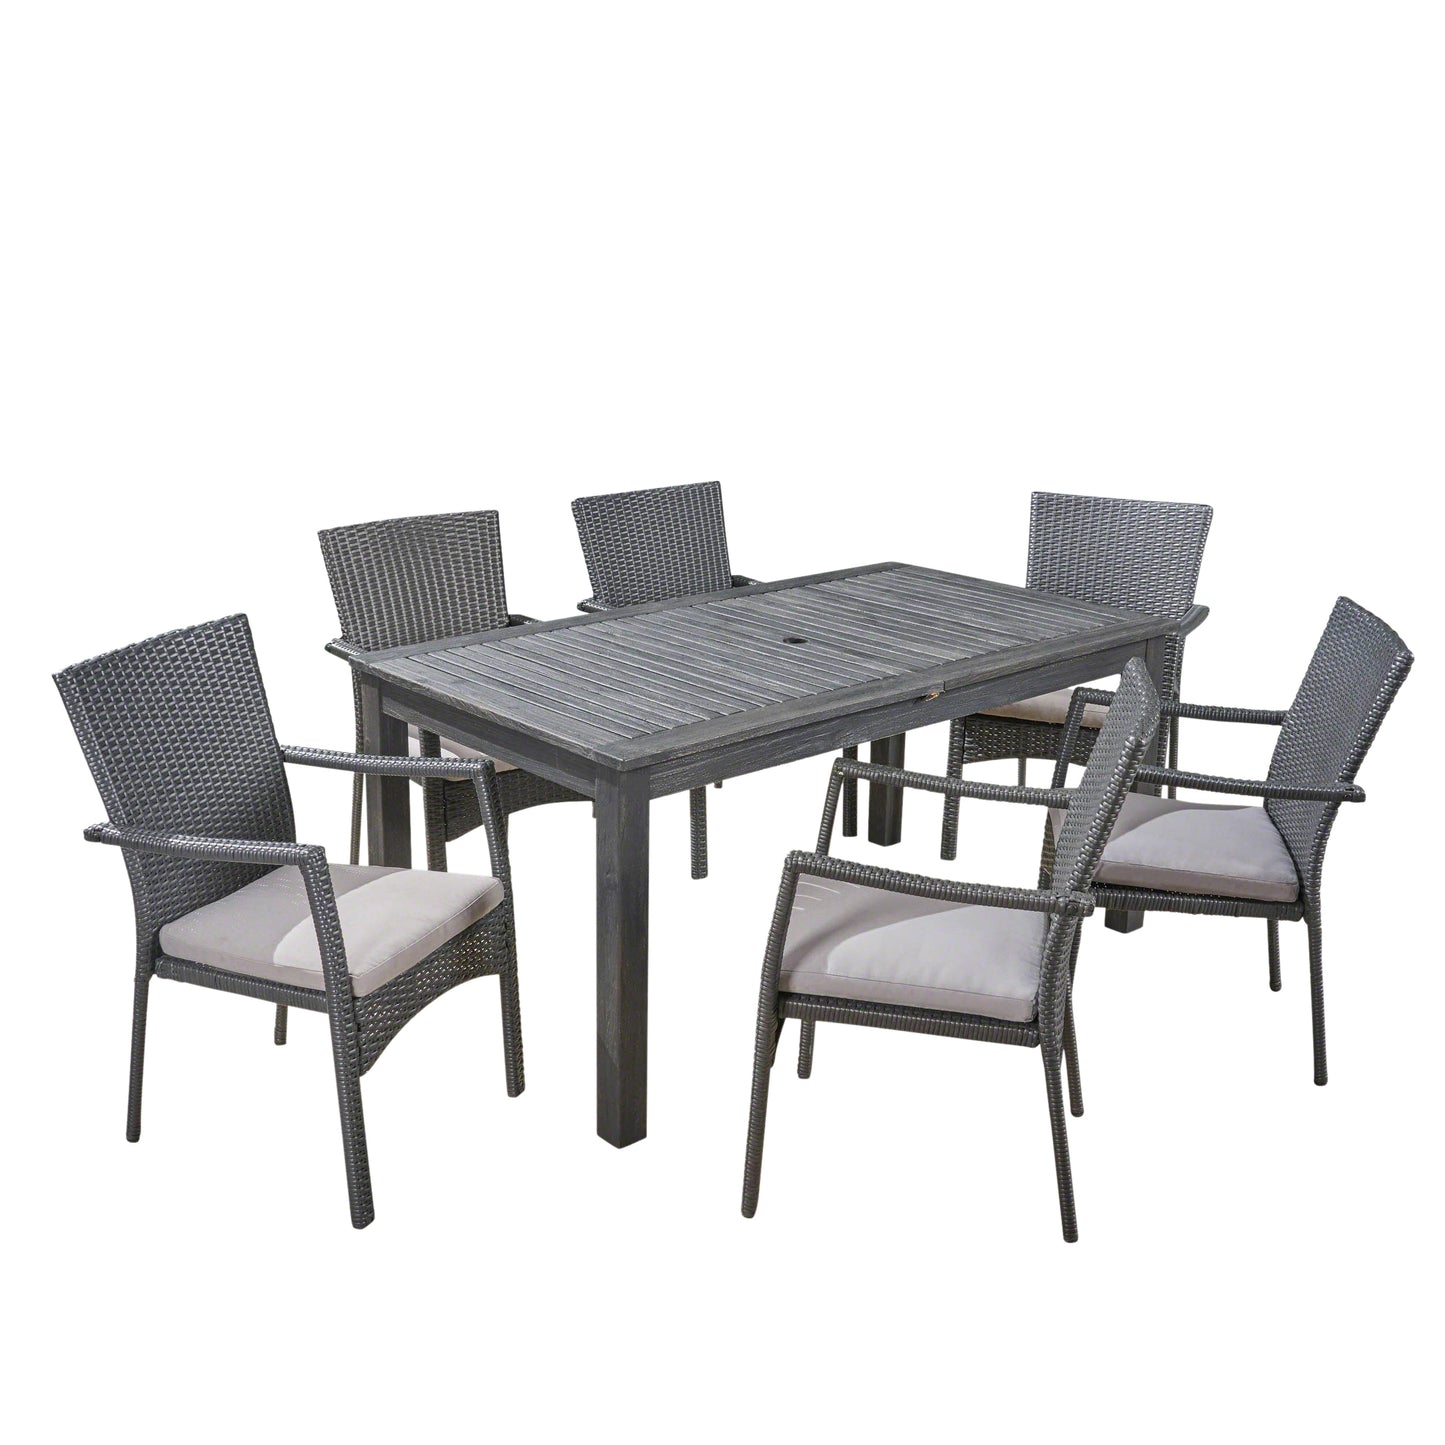 Louis Outdoor 7 Piece Wood and Wicker Expandable Dining Set